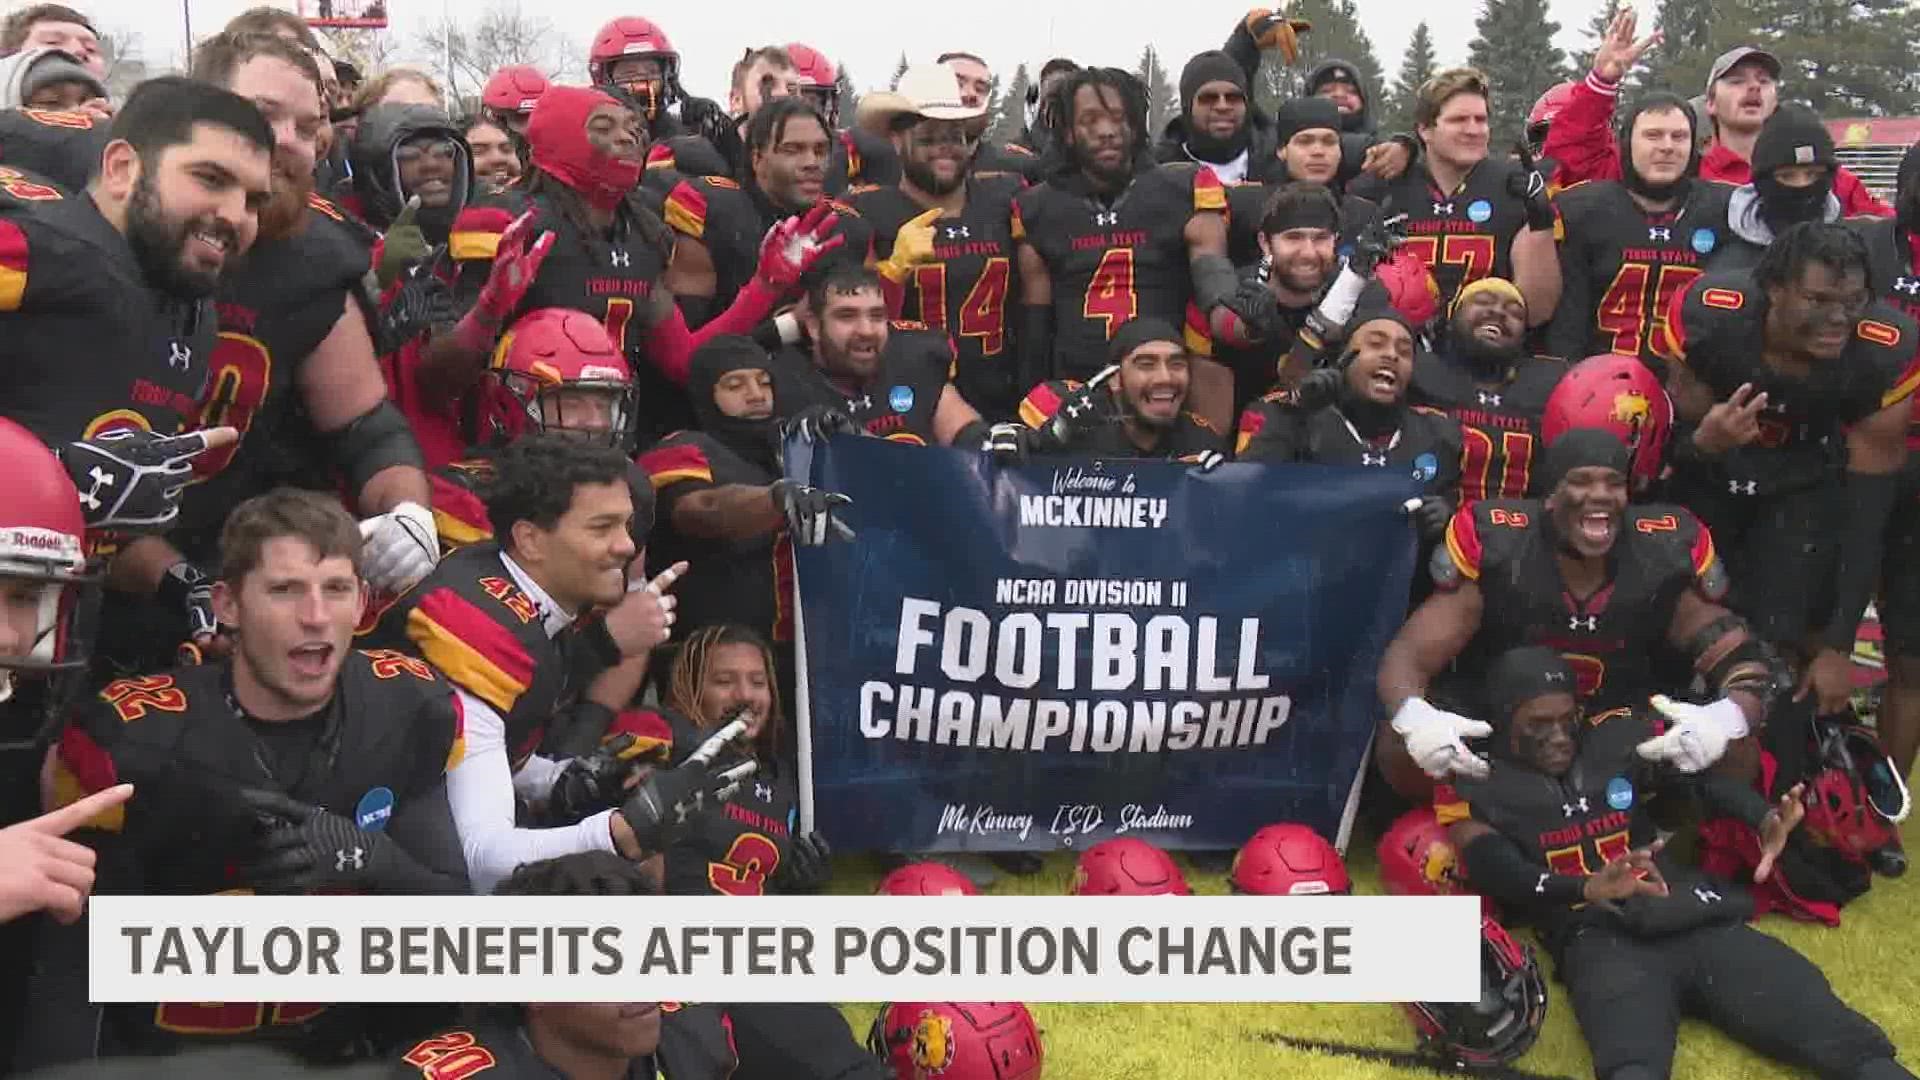 Ferris State is back in the Division II national championship game for the second year in a row.